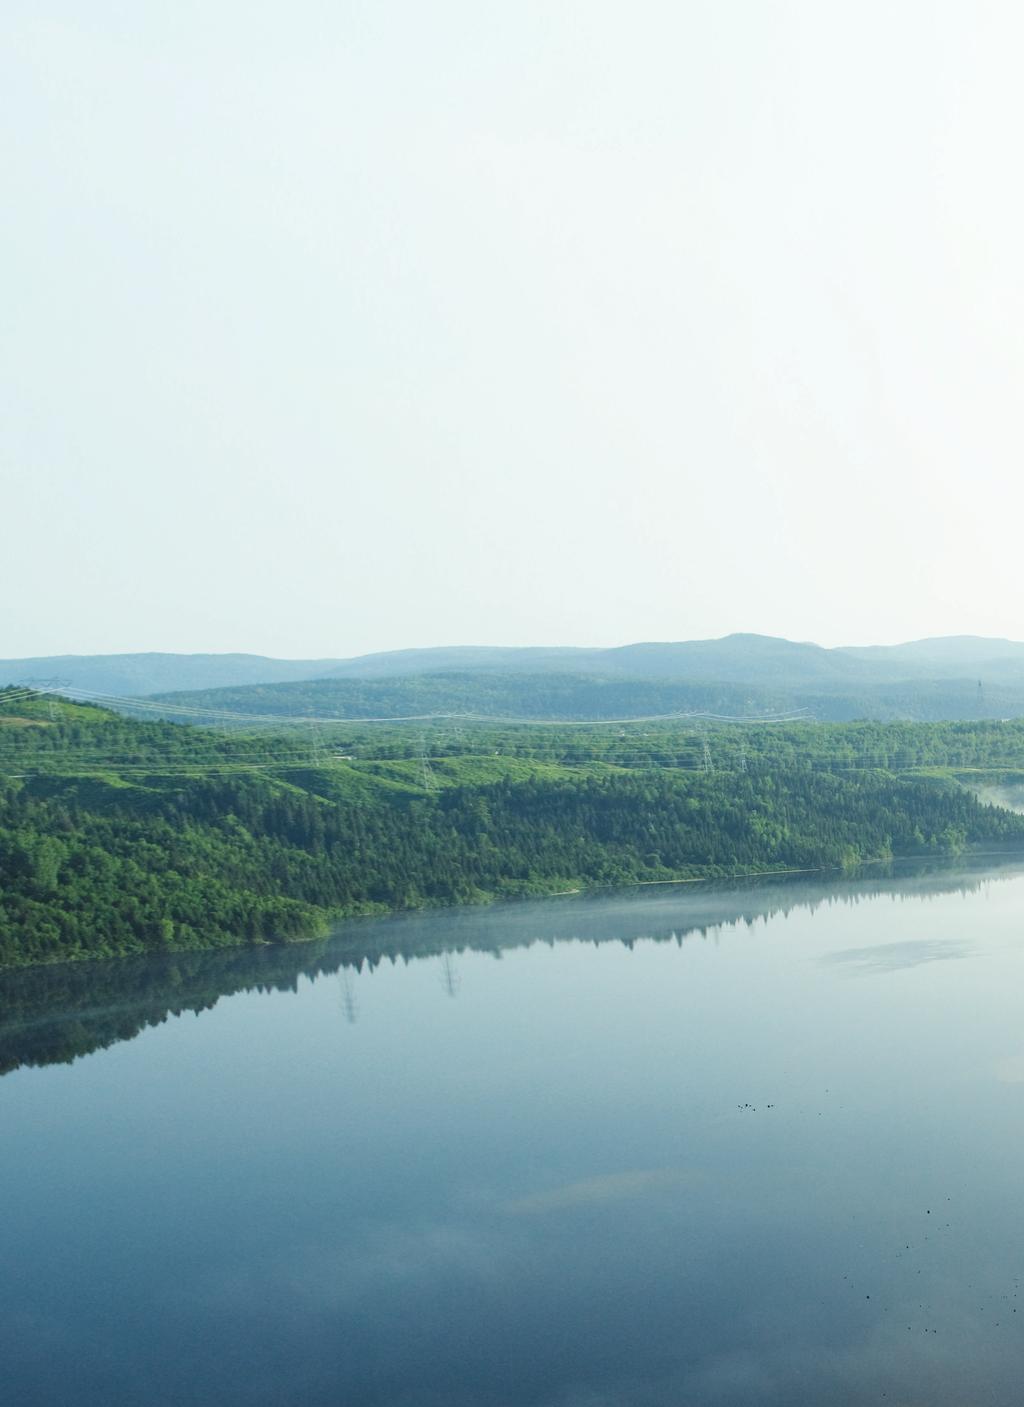 RELIABLE BASELOAD ENERGY WITH ENVIRONMENTAL ATTRIBUTES Hydro-Québec has a fleet of 63 hydropower generating stations, 62 of which are connected to the main grid.